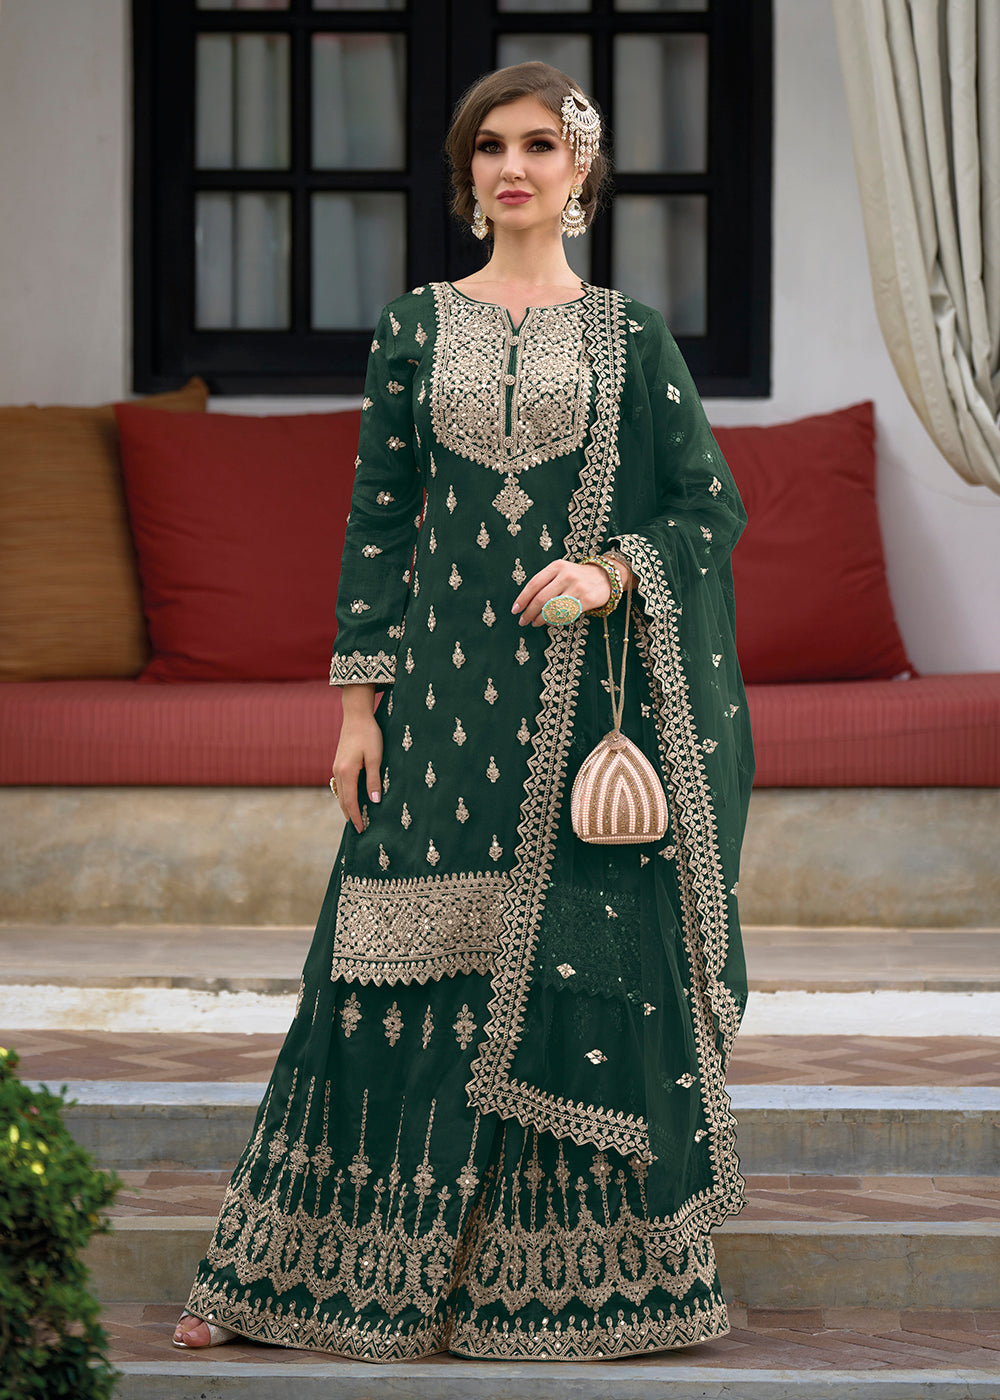 Shop Now Festive Amazing Dark Green Heavy Silk Sharara Suit Online at Empress Clothing in USA, UK, Canada, Italy & Worldwide. 